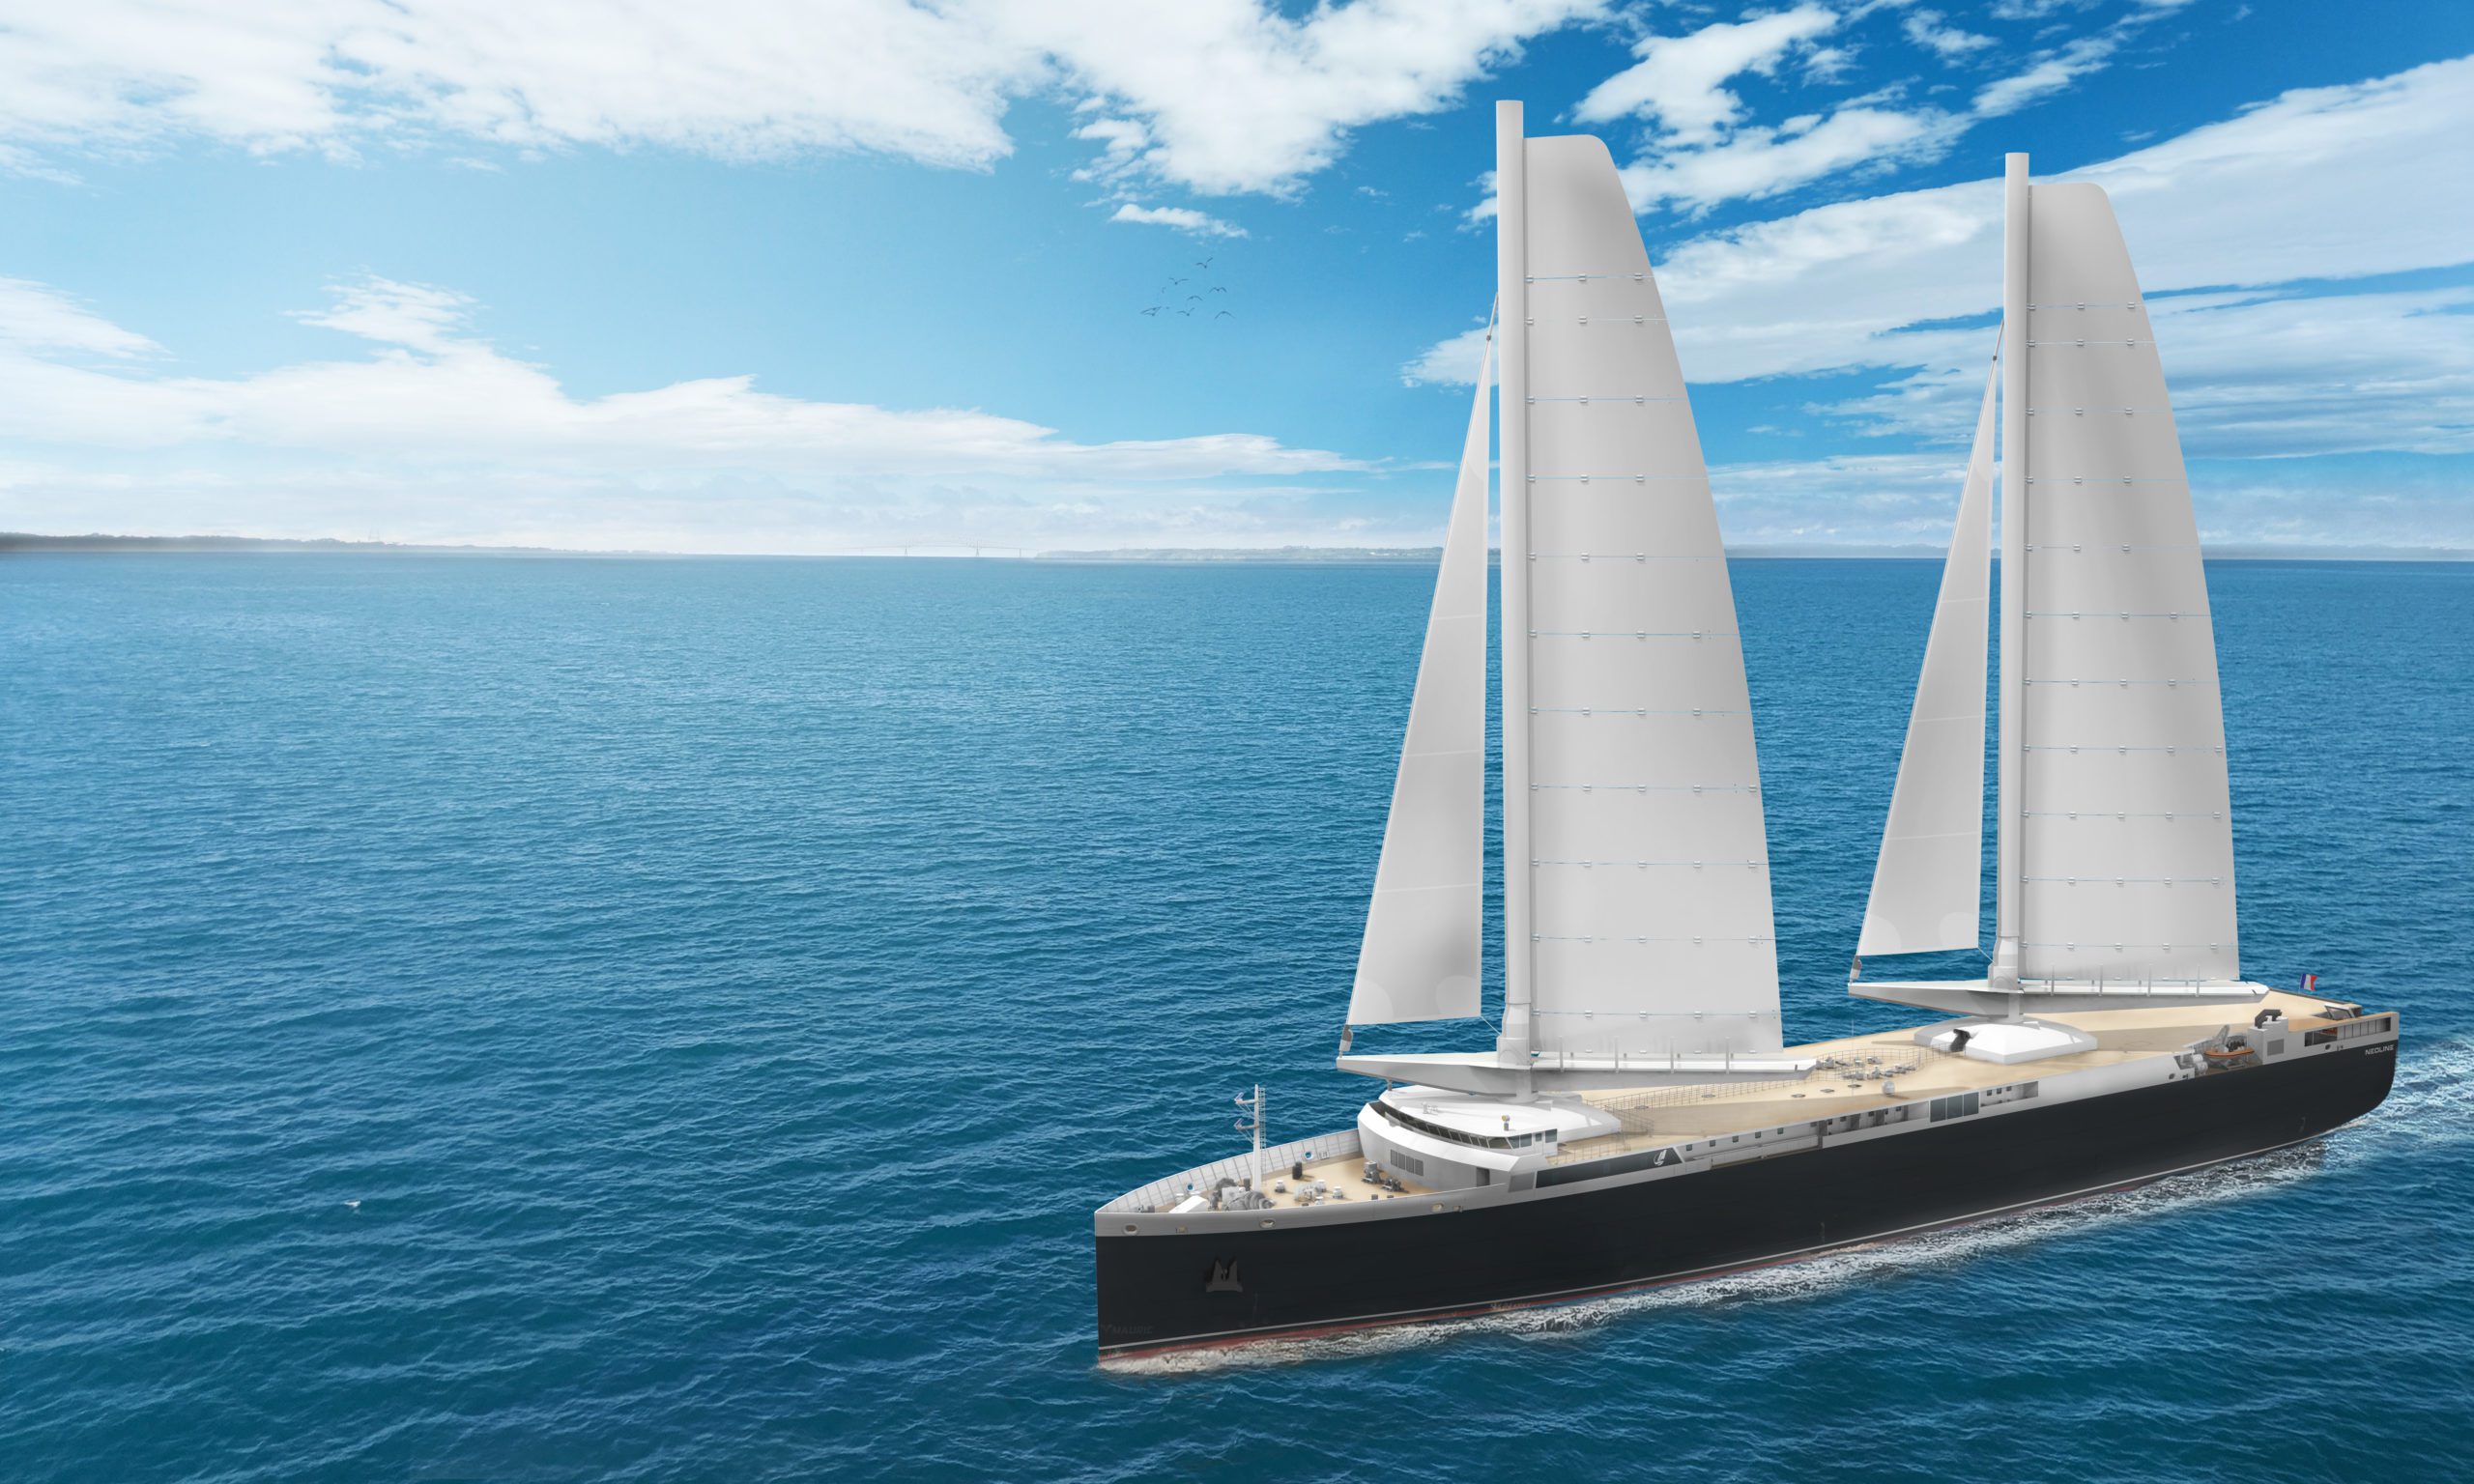 NEOLINE’s First Sail-Powered Cargo Ship Moves to Construction